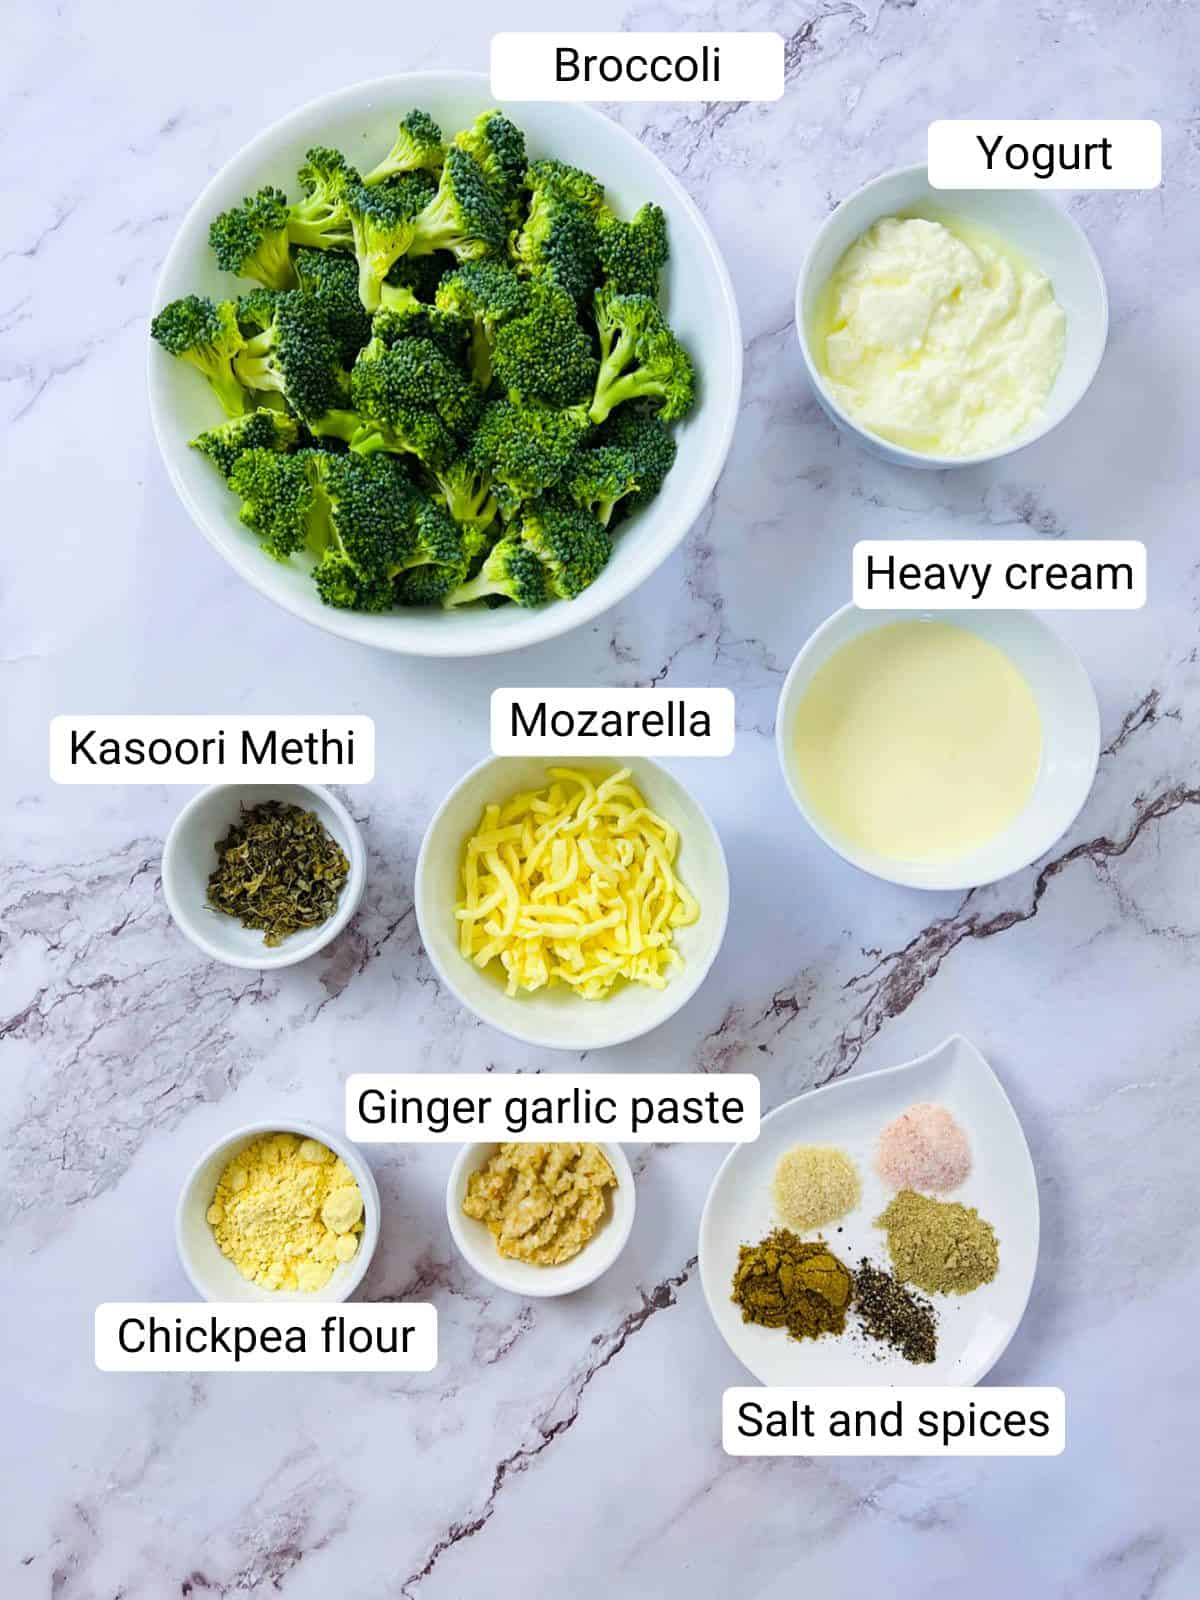 Air fryer malai broccoli ingredients placed on a marble surface.